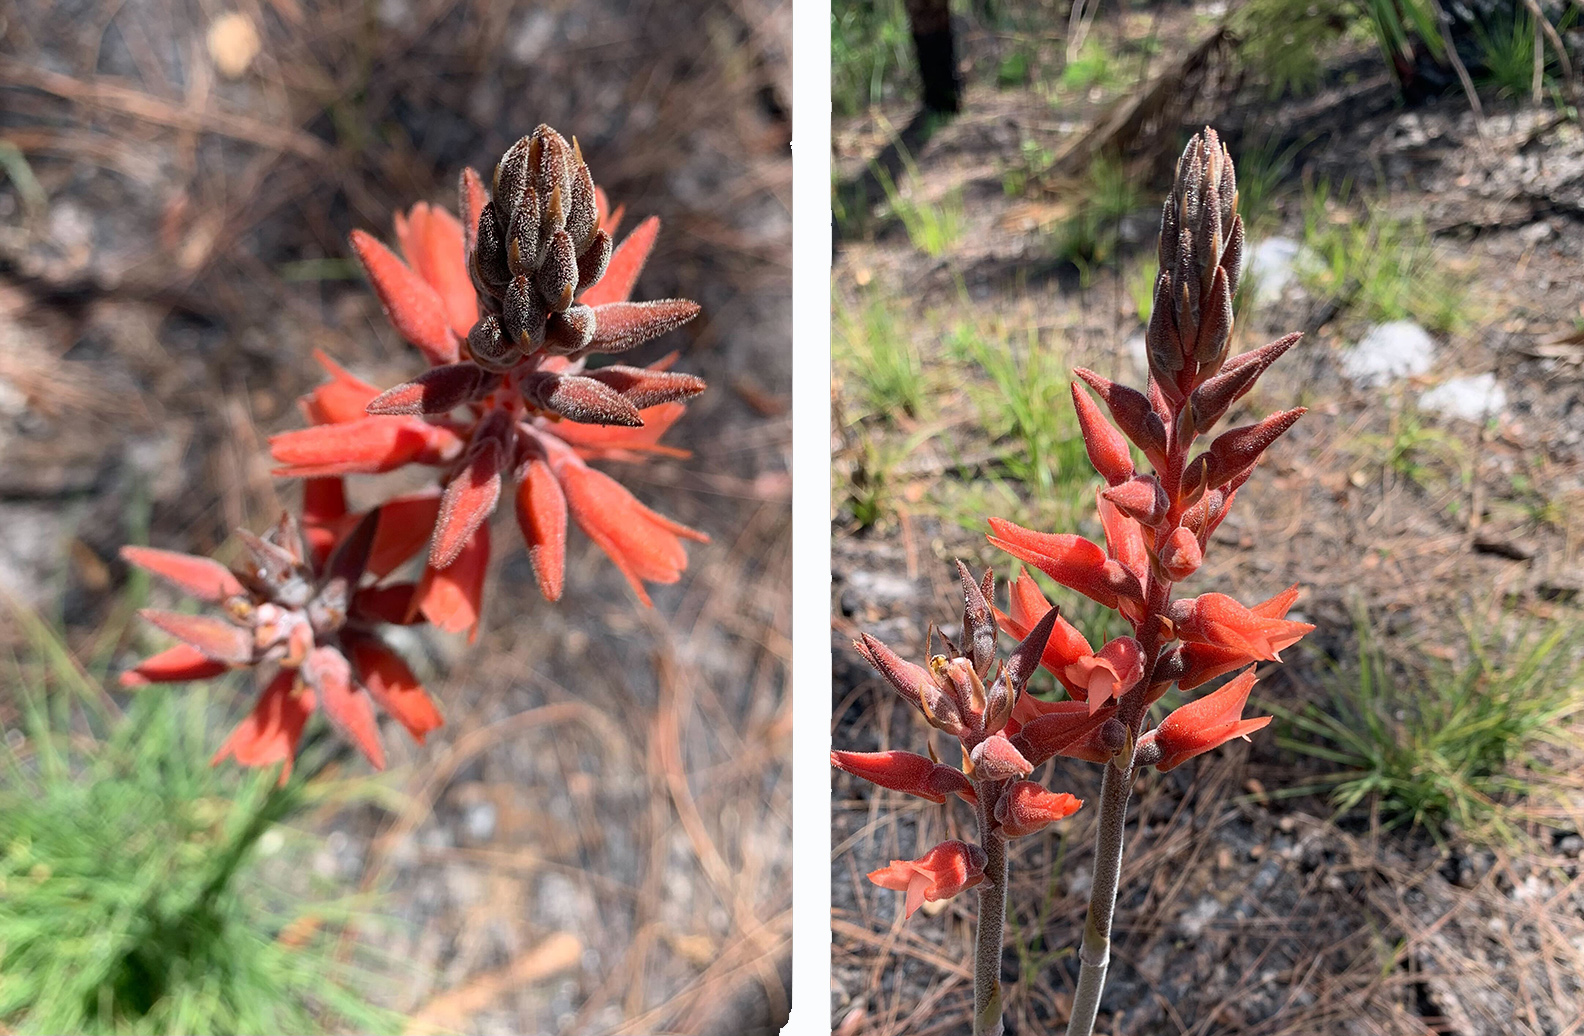 Photos of red flower spikes growing out of the ground